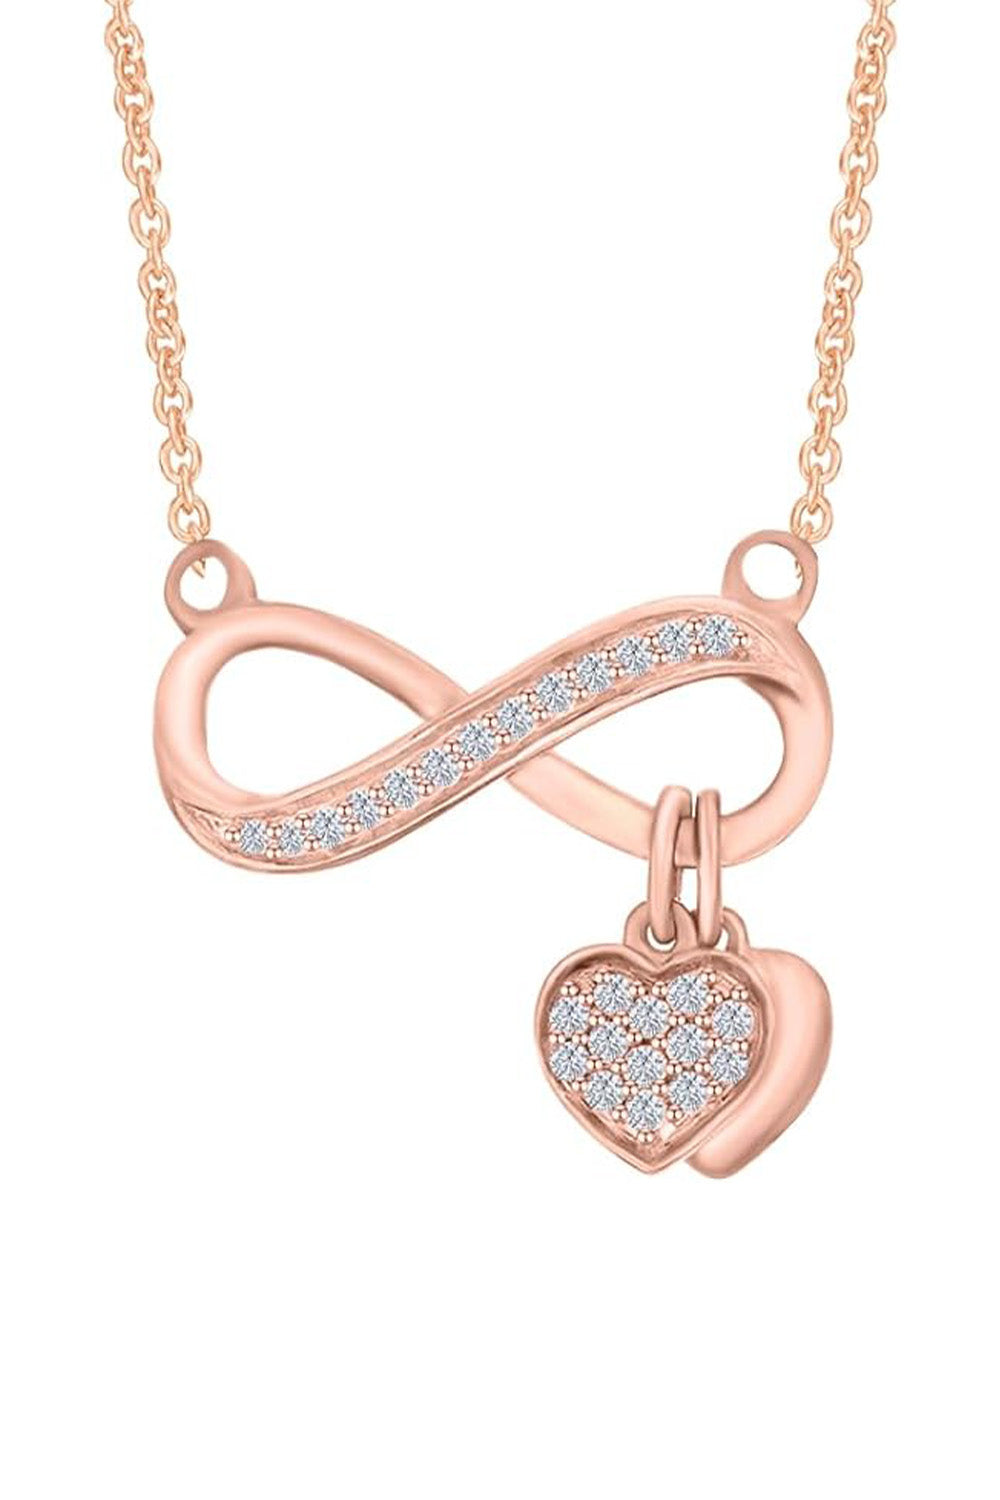 Rose Gold Color Double Heart Infinity Necklace